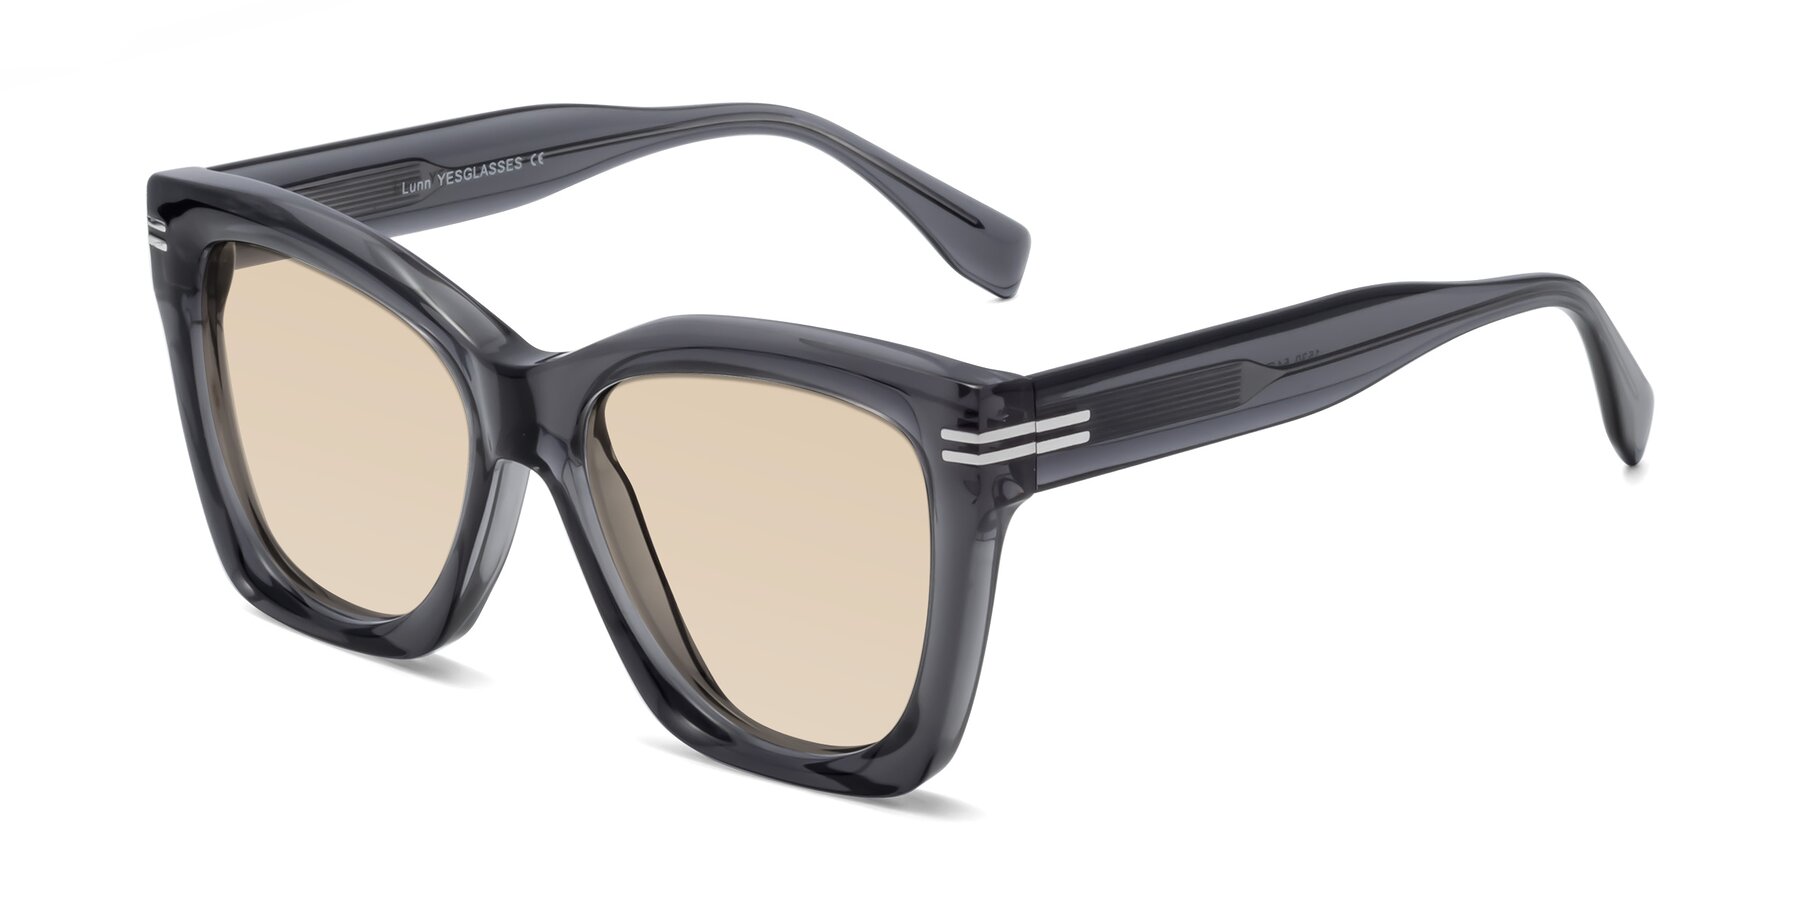 Angle of Lunn in Translucent Gray with Light Brown Tinted Lenses